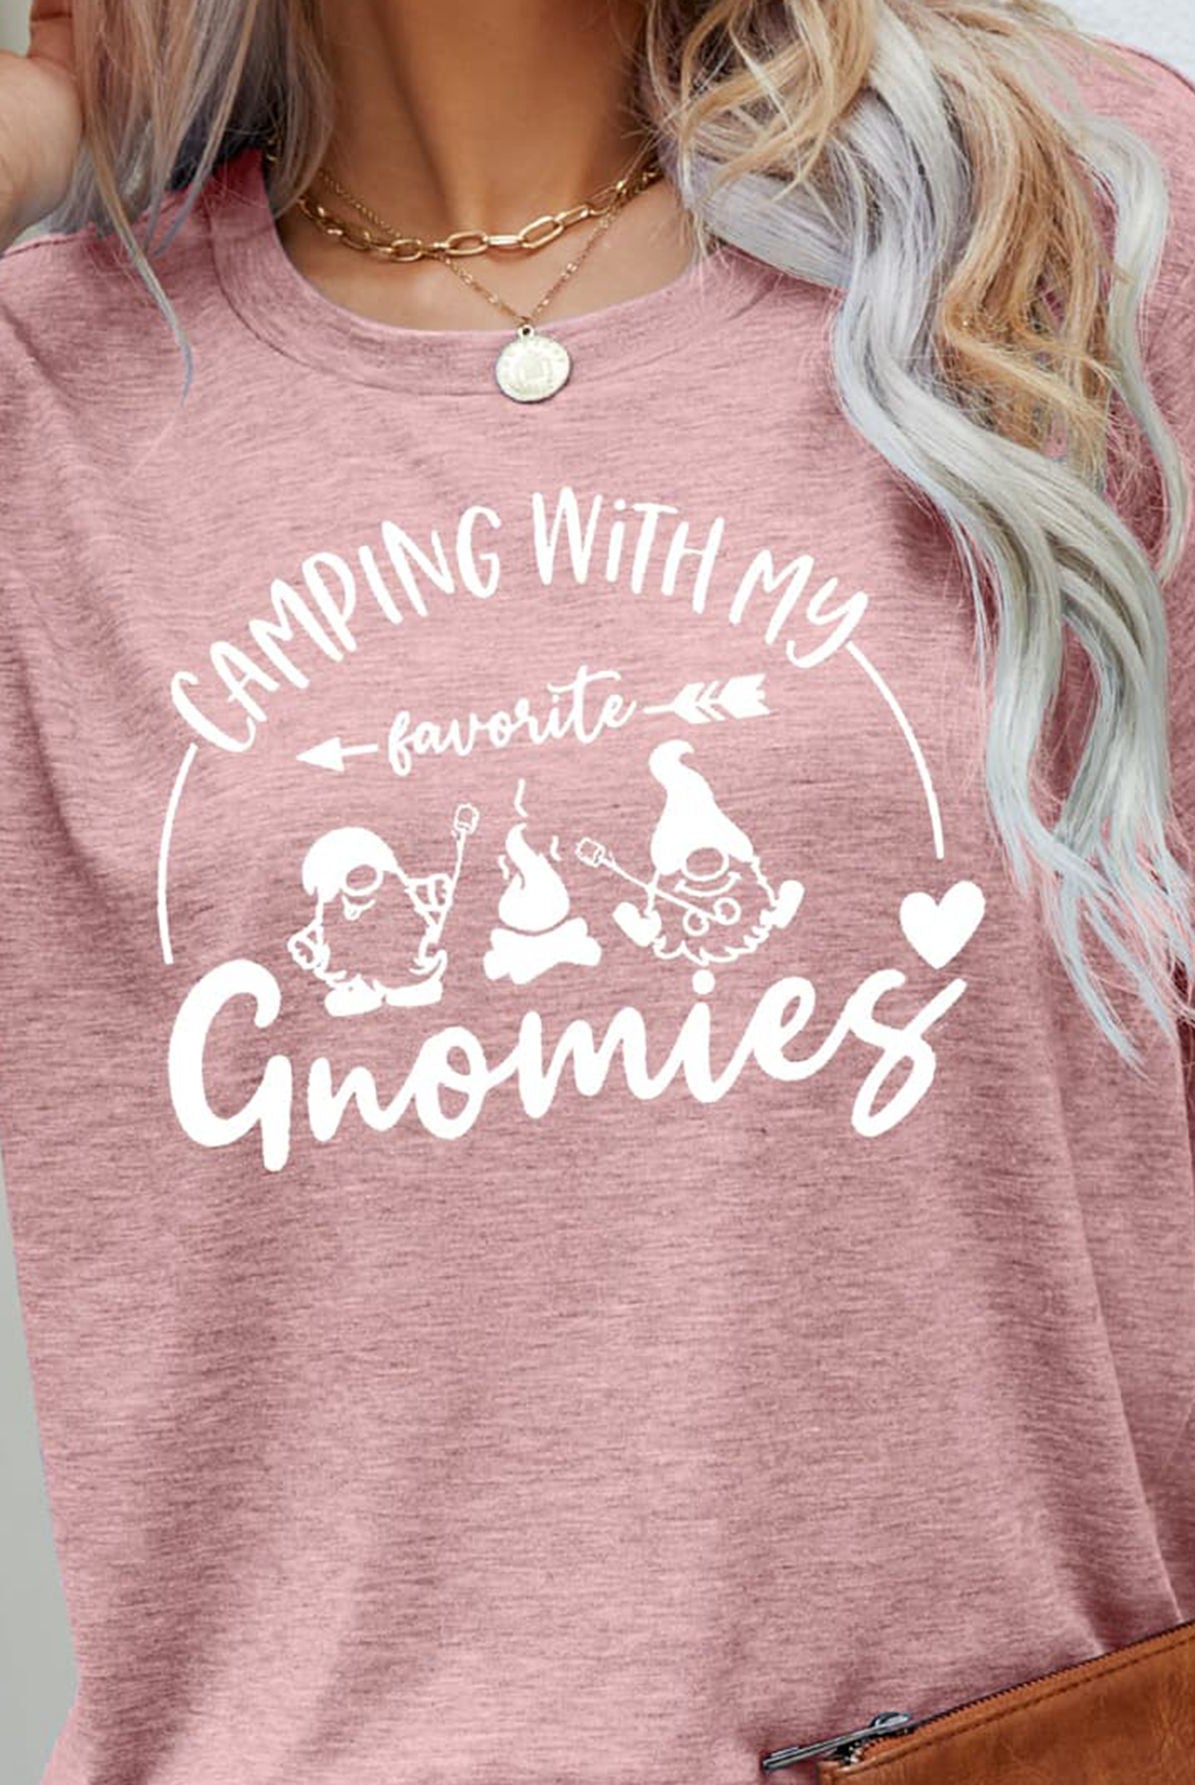 Rosy Brown CAMPING WITH MY FAVORITE GNOMIES Graphic Tee Tops